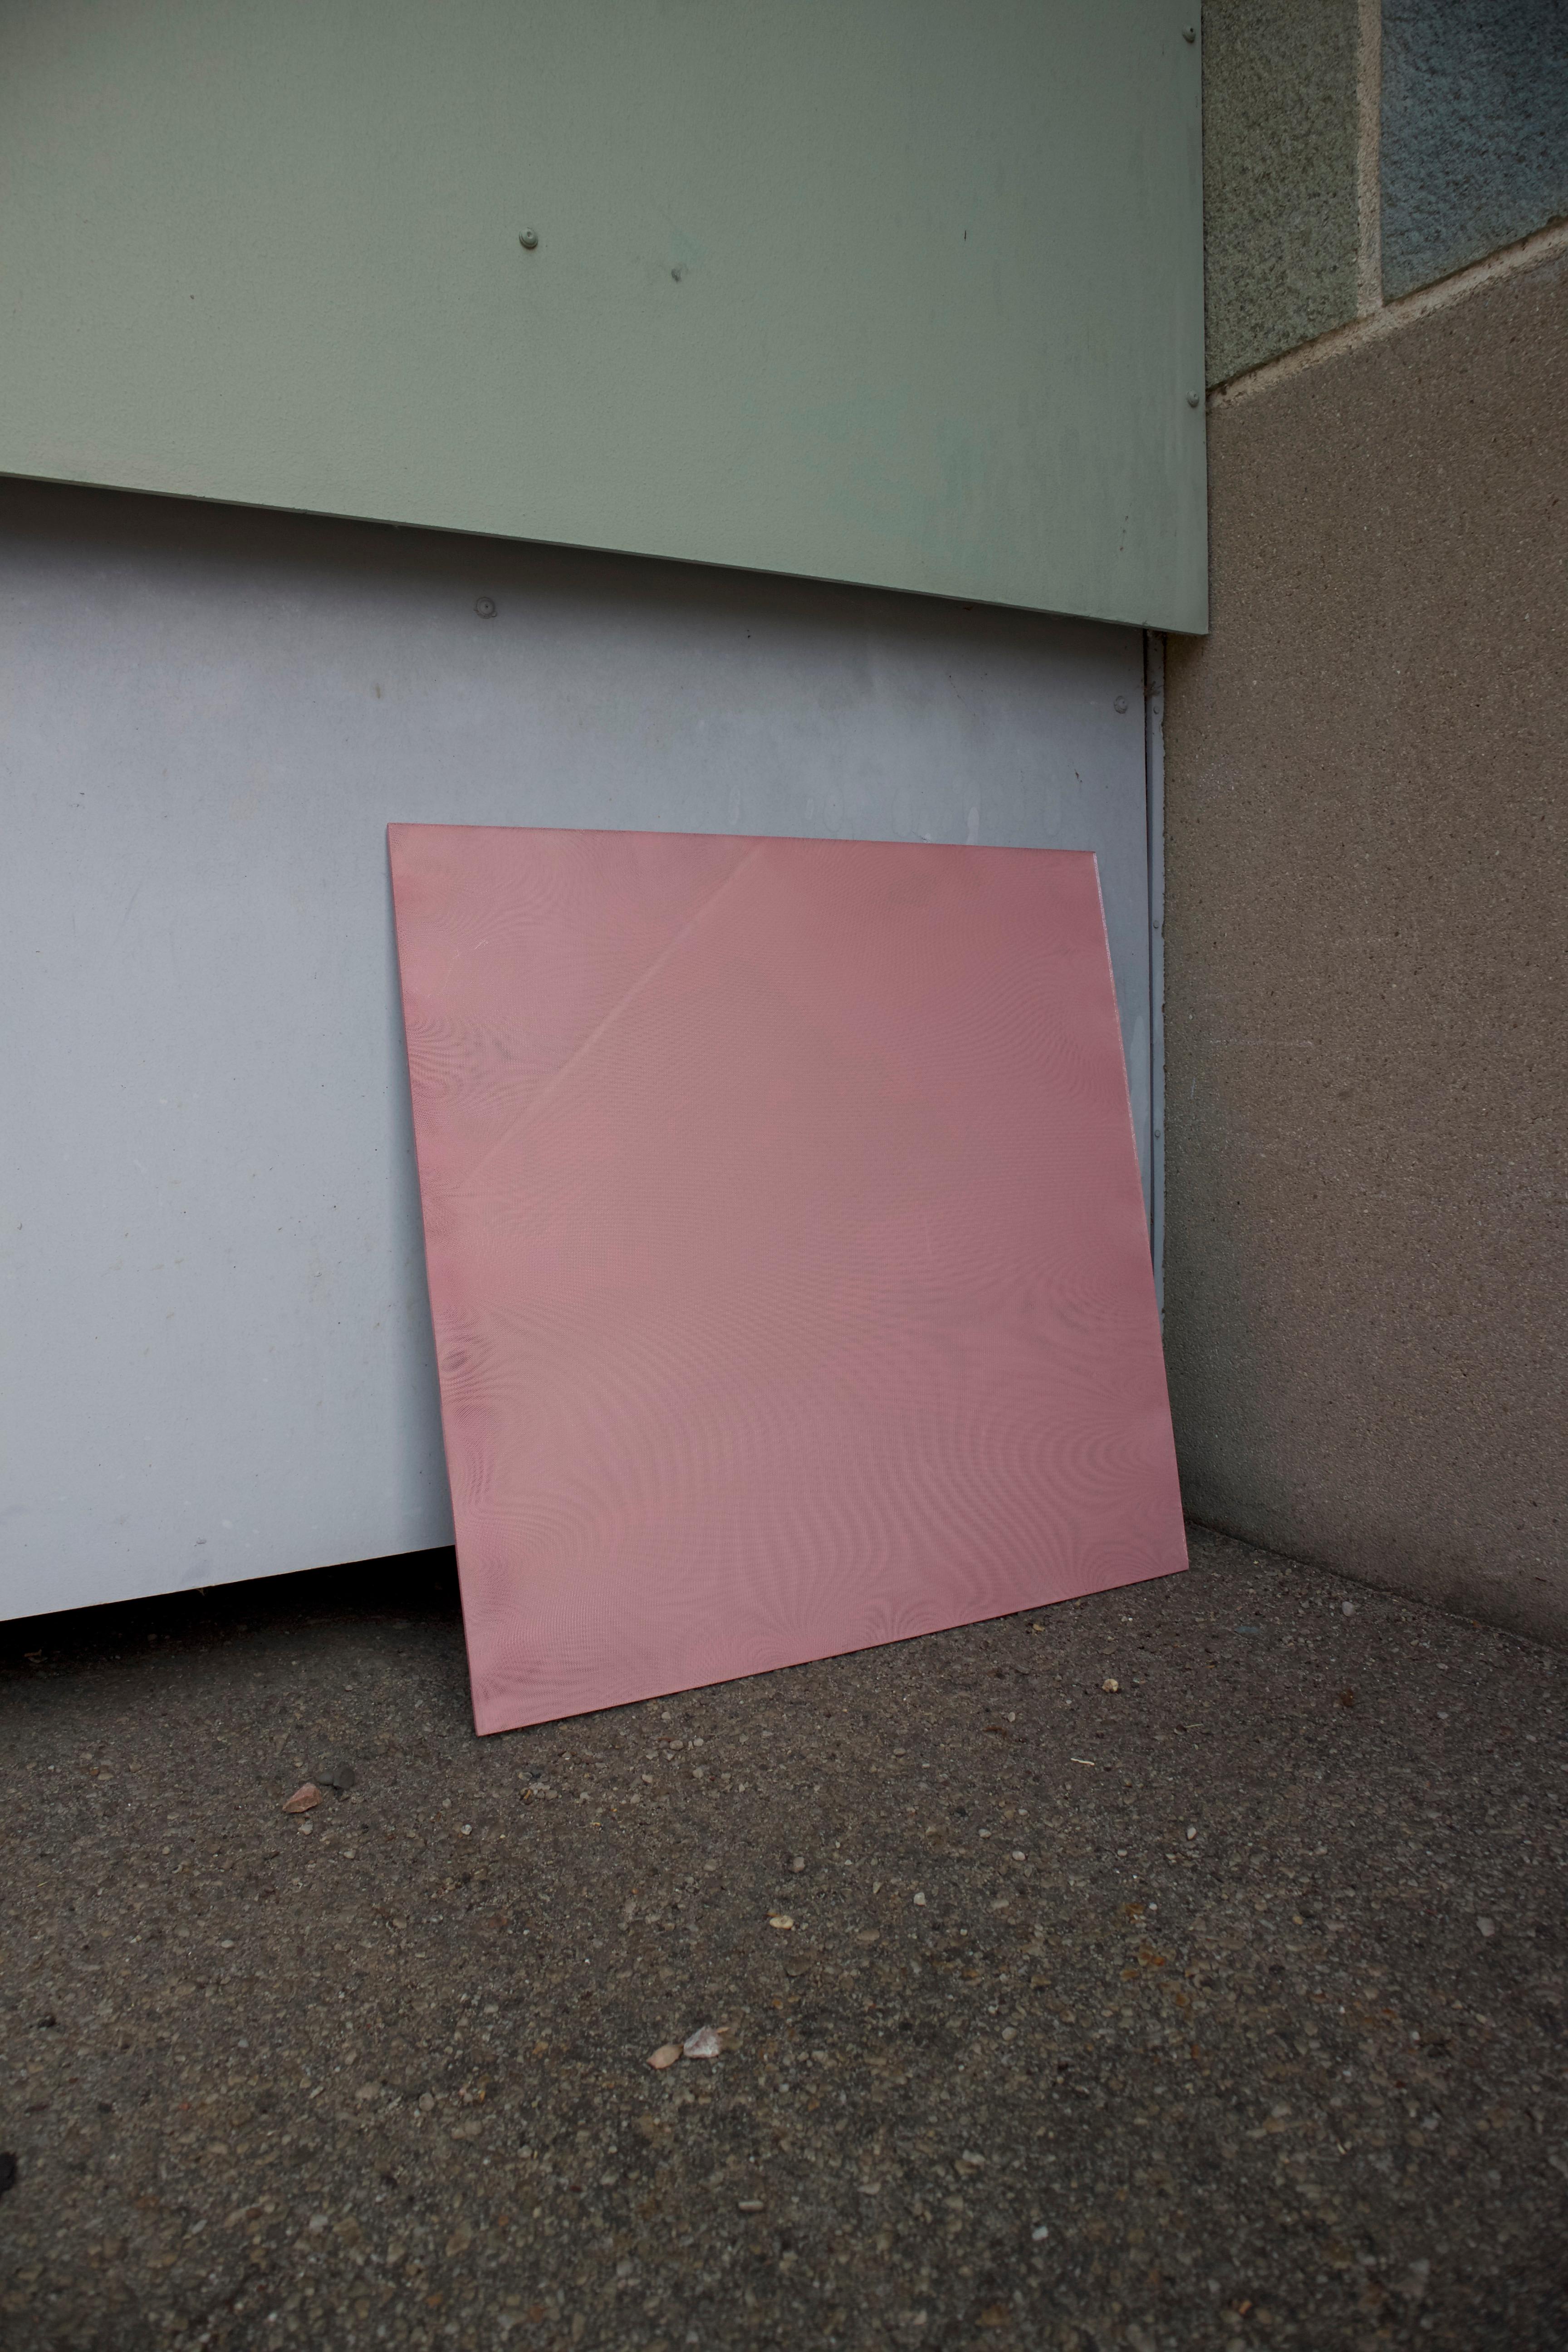 Moiré L square mirror by Kajsa Willner
Dimensions: 60 x 1.6 x 60 cm
Materials: Mirror, Polyester

Playing with imperfect alignments, a small displacement, rotation or difference in the period to make interference patterns occur that lead to the